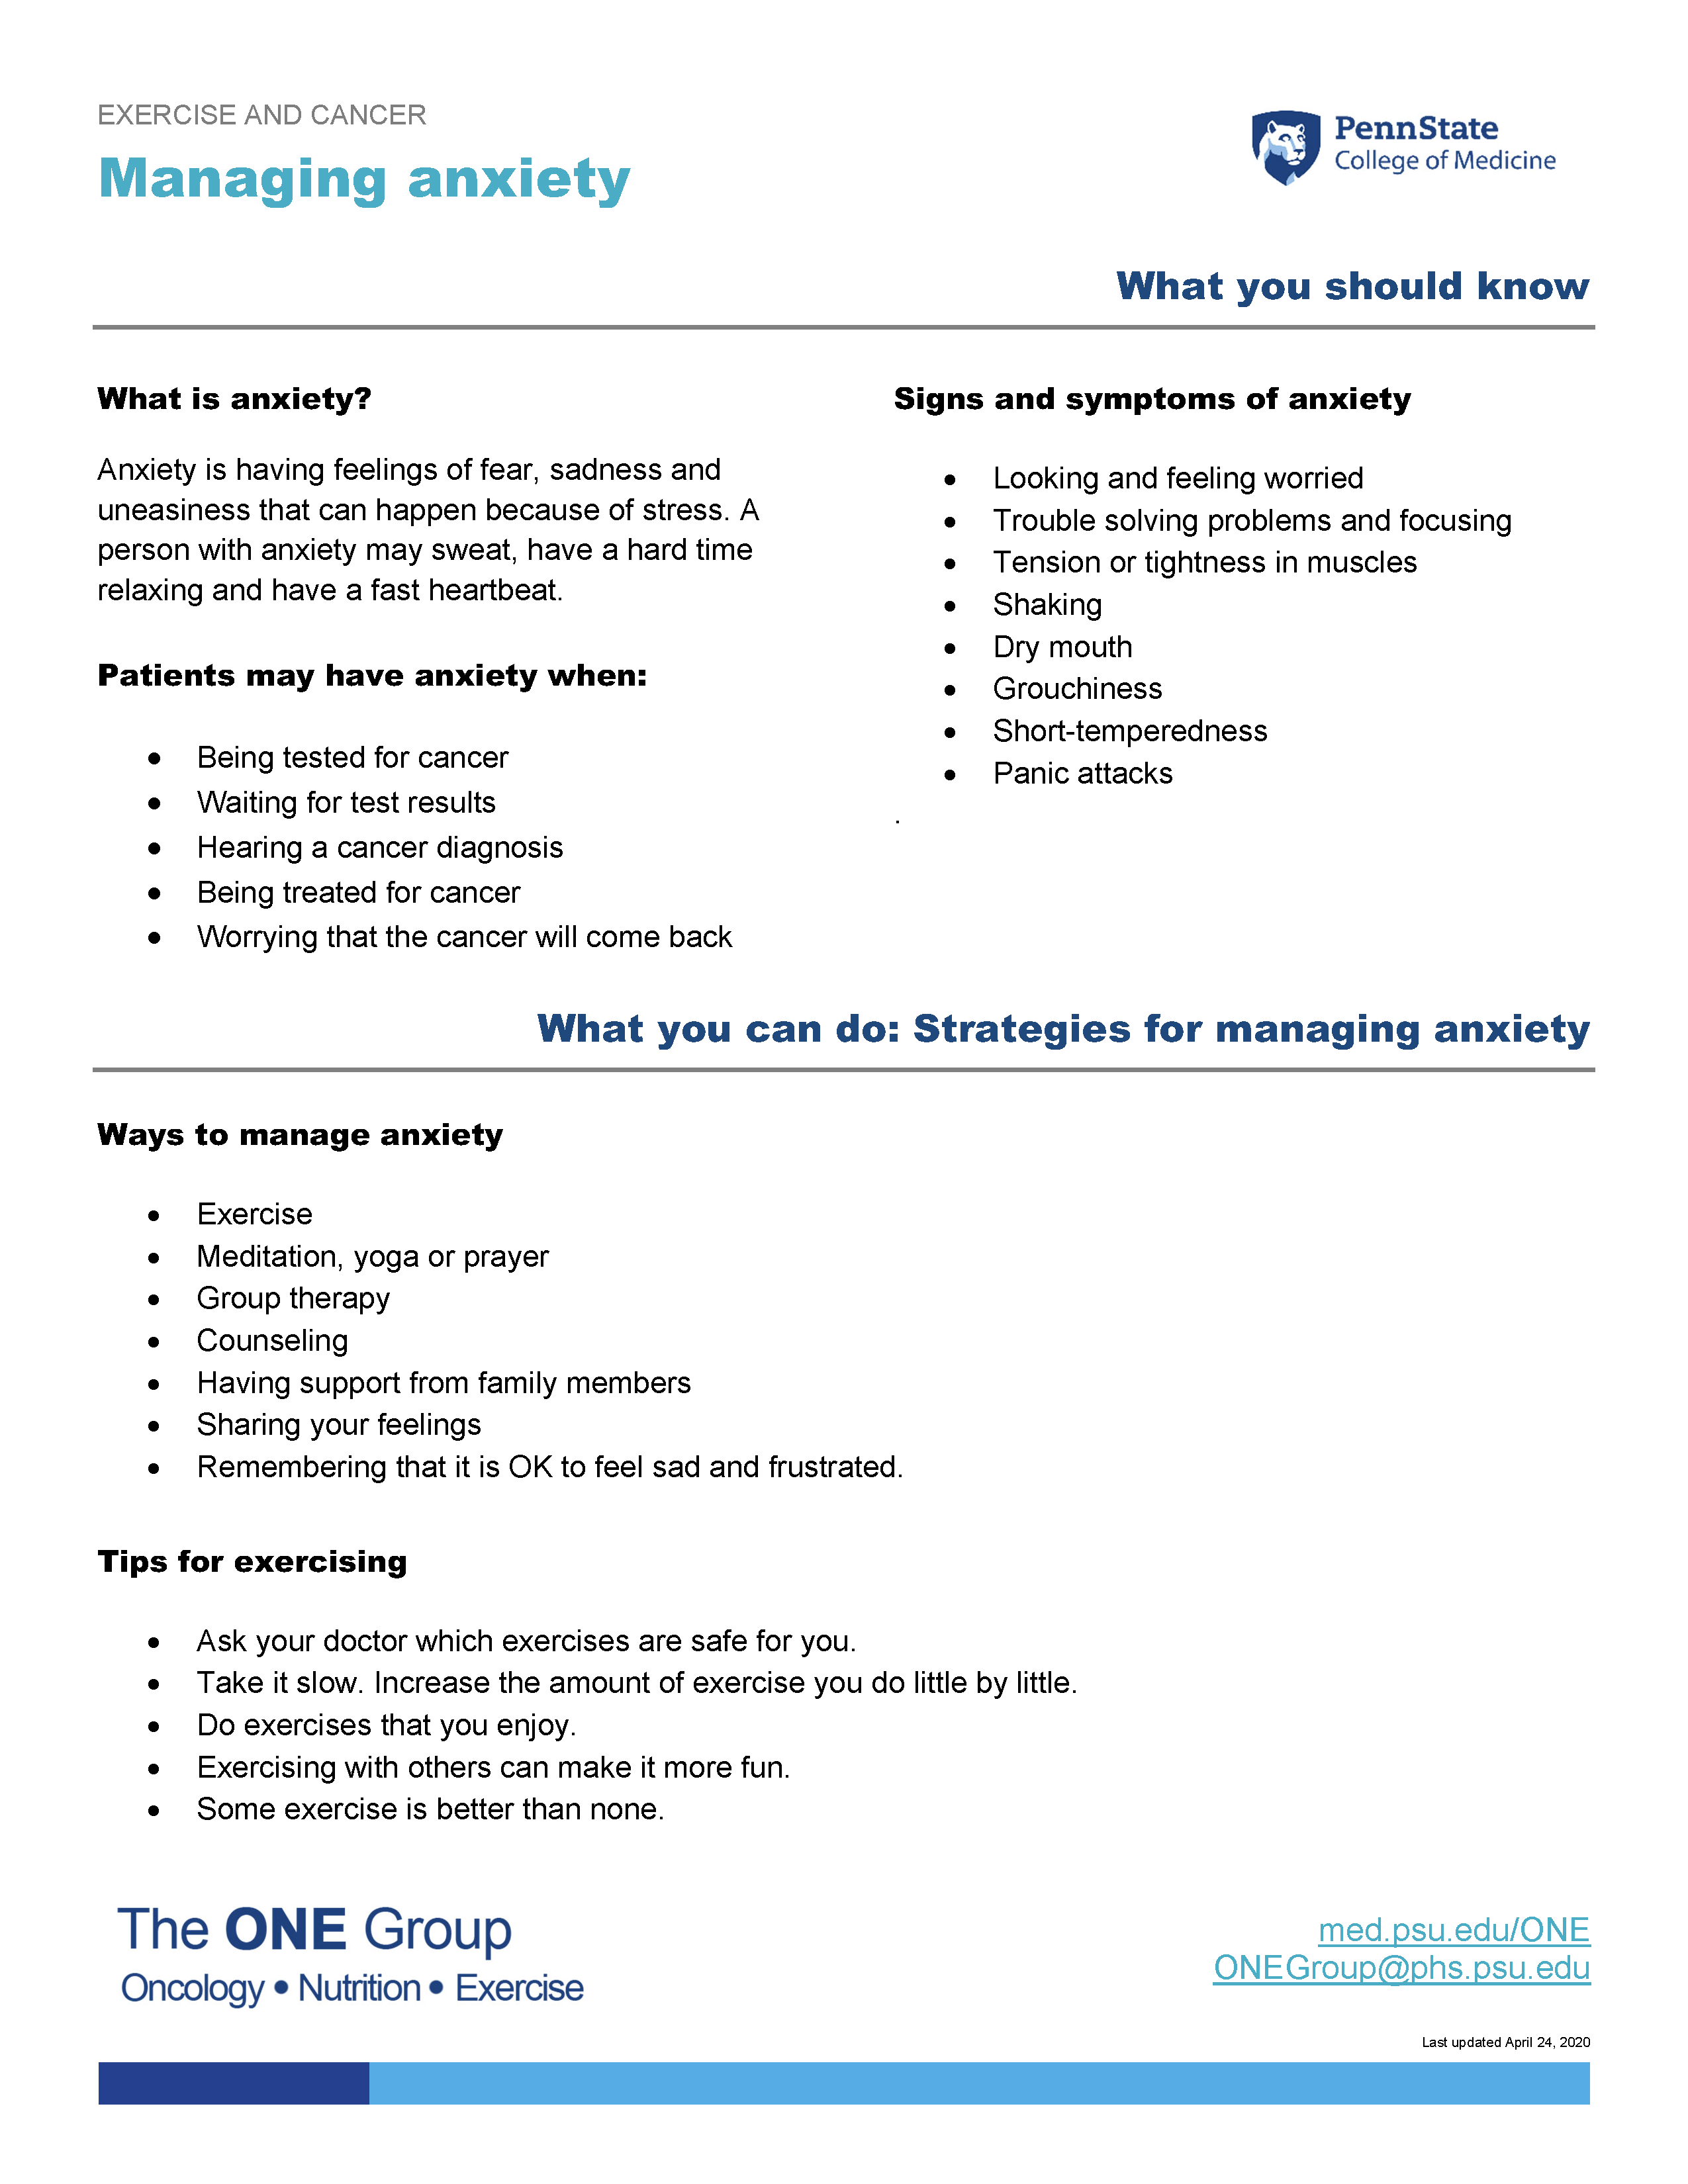 The managing anxiety guide from The ONE Group includes the information on this page, formatted for print.